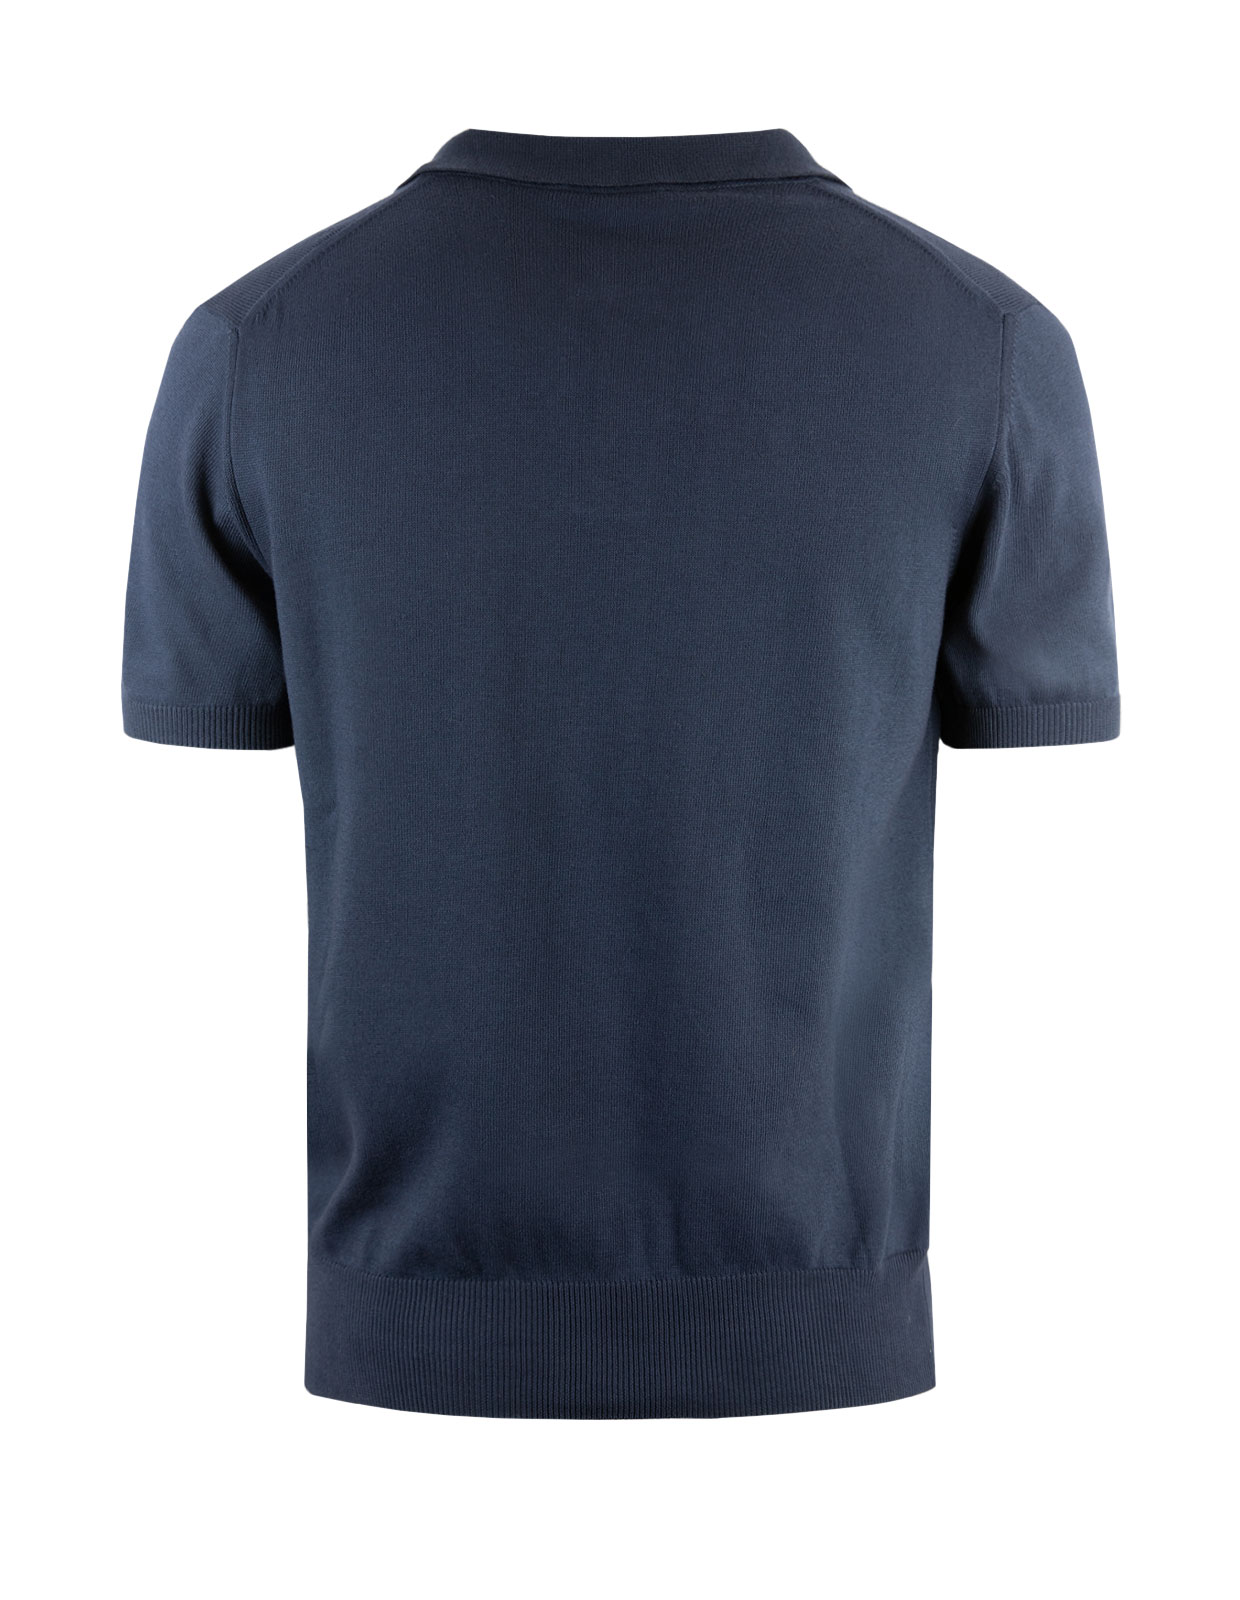 Open Polo Shirt Knitted Cotton Navy